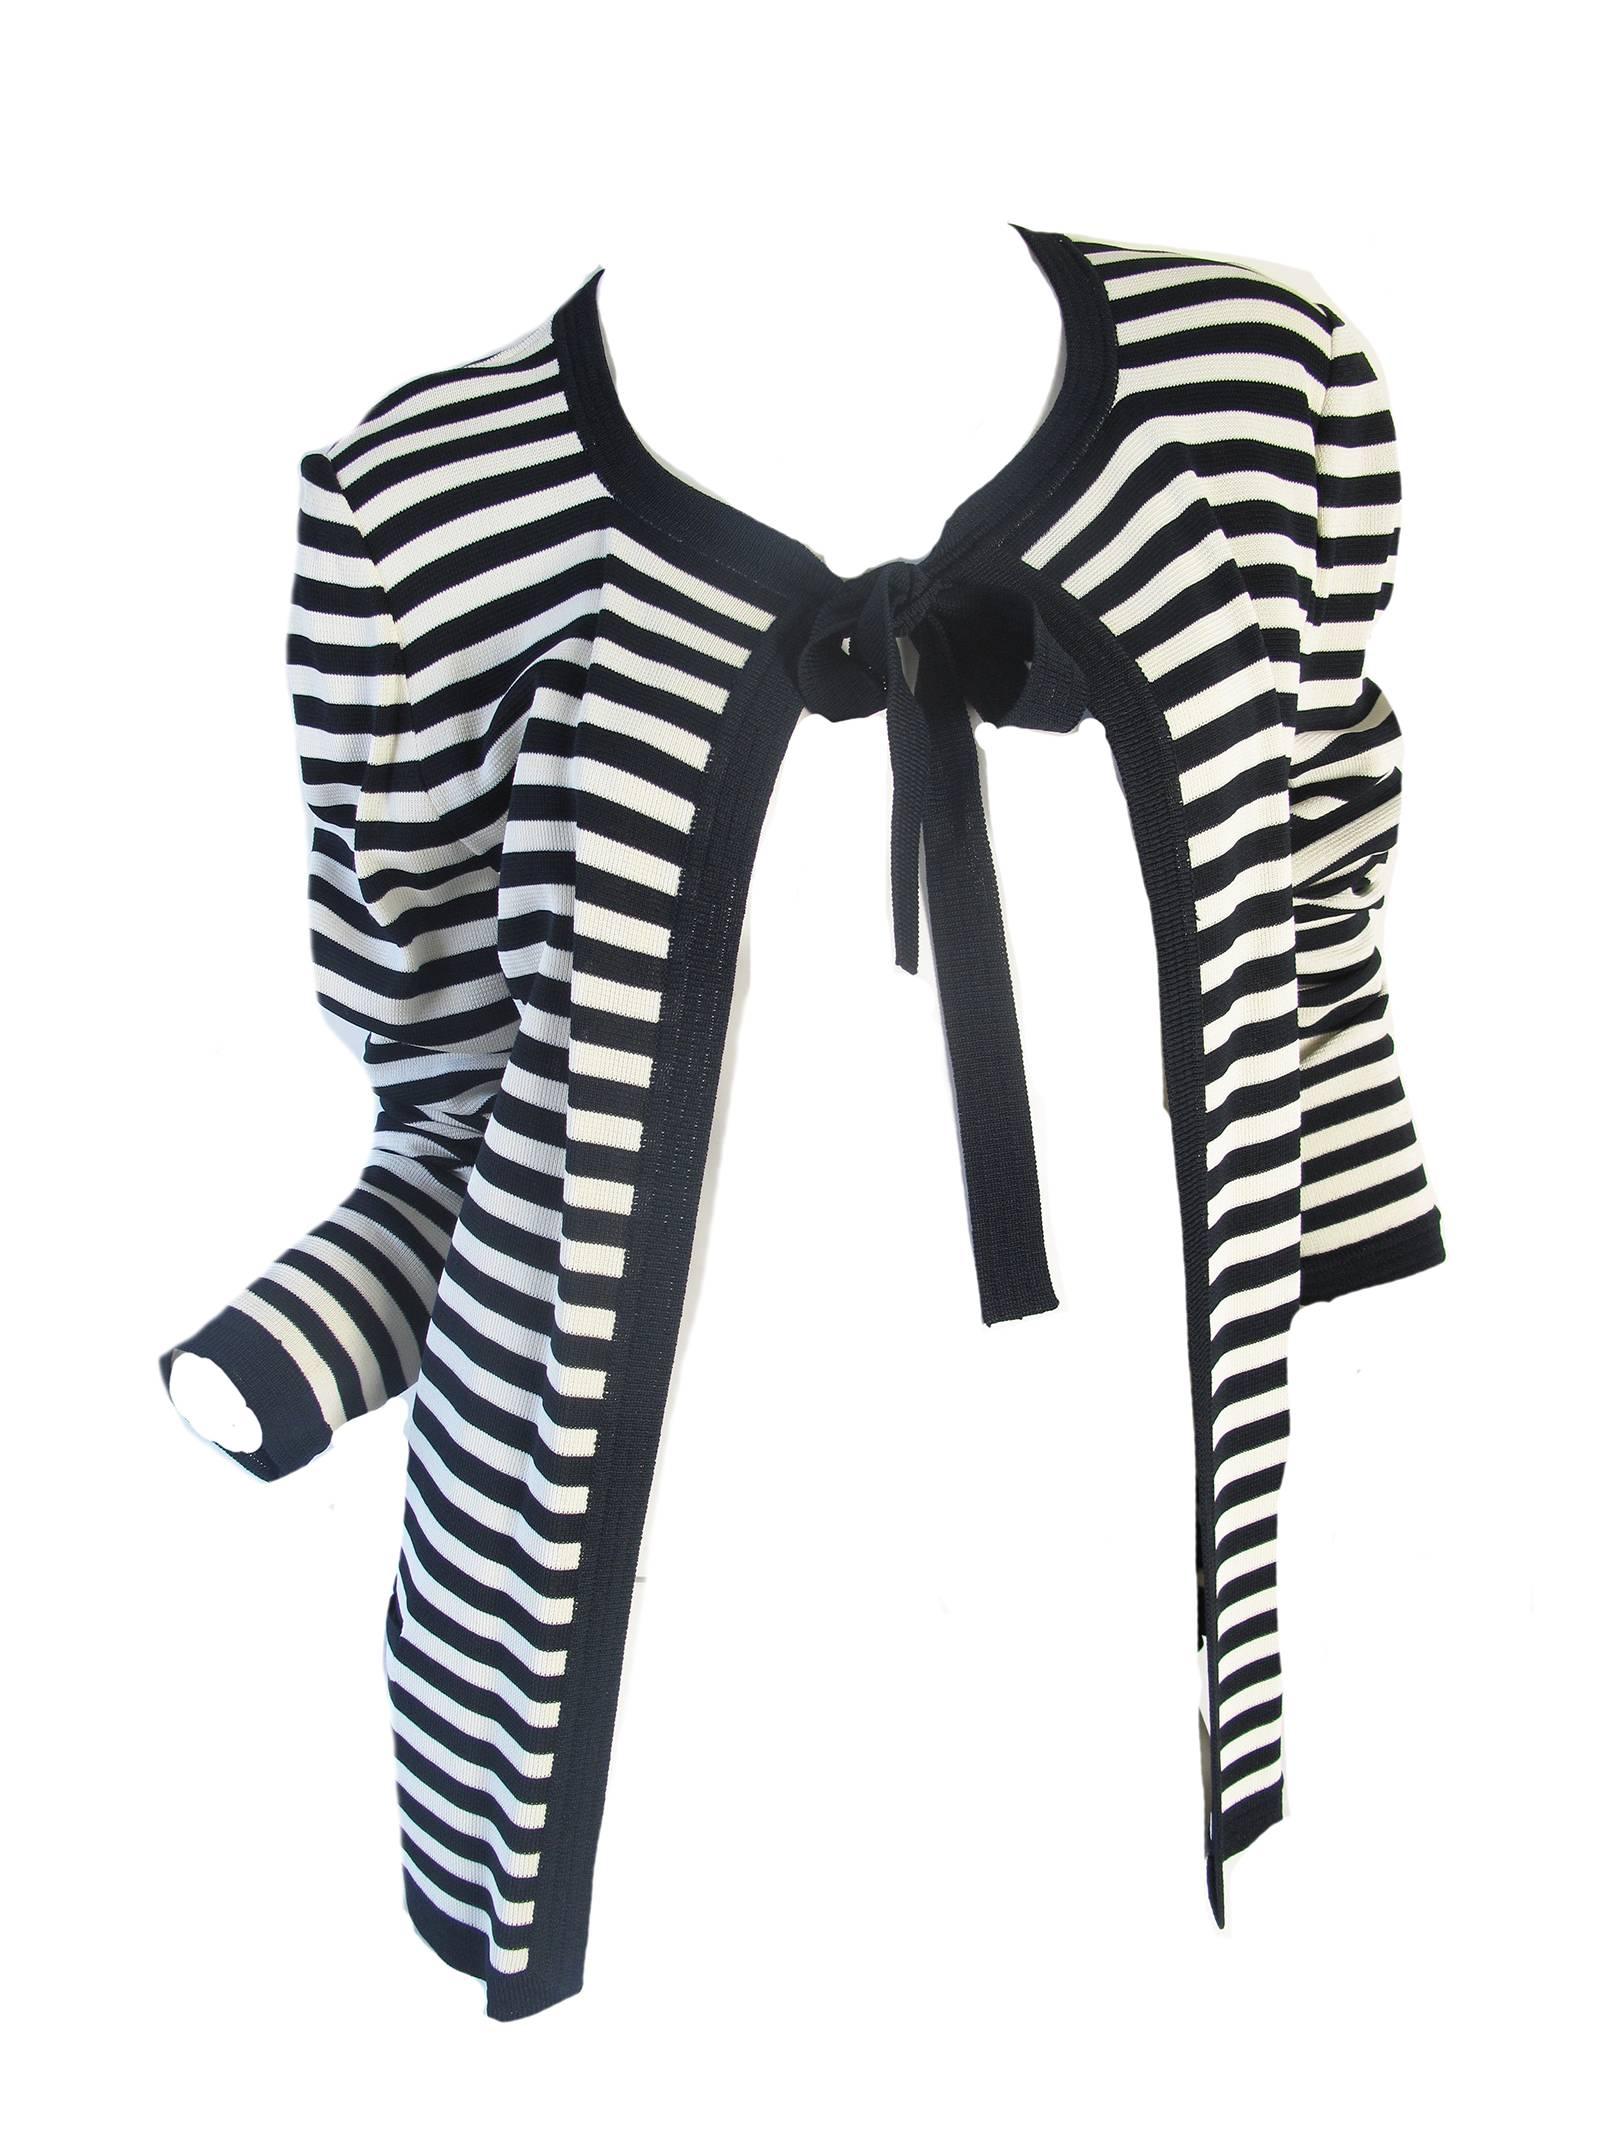 Ungaro navy and cream striped cardigan with tie at neck. 100% rayon. Condition: Excellent, never worn. Size M
We accept returns for refund, please see our terms.   We offer free ground shipping within the US. 